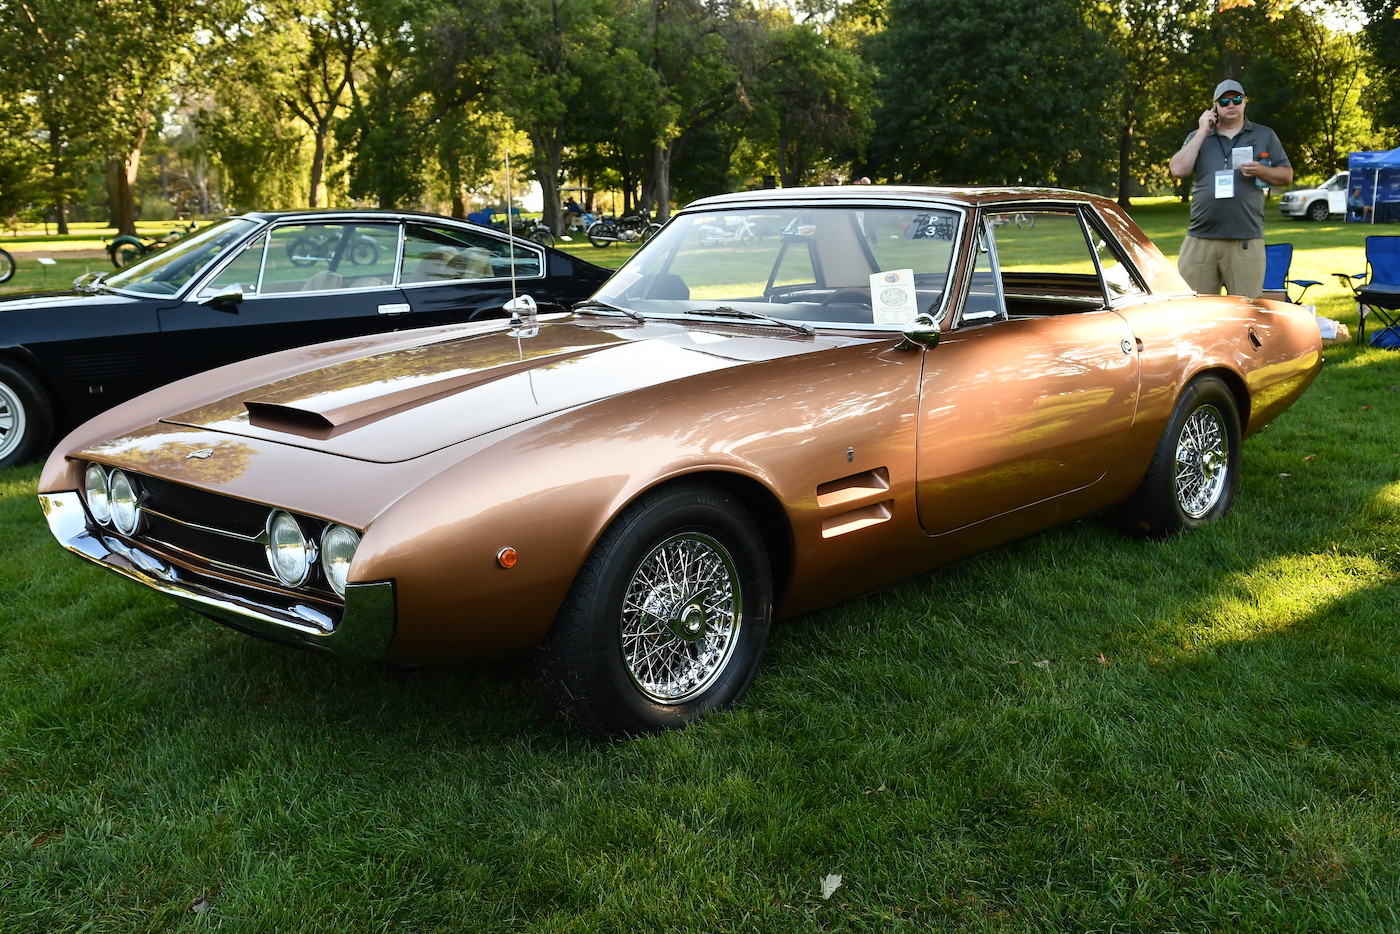 The EyesOn Design Car Show in Grosse Pointe Shores, Michigan